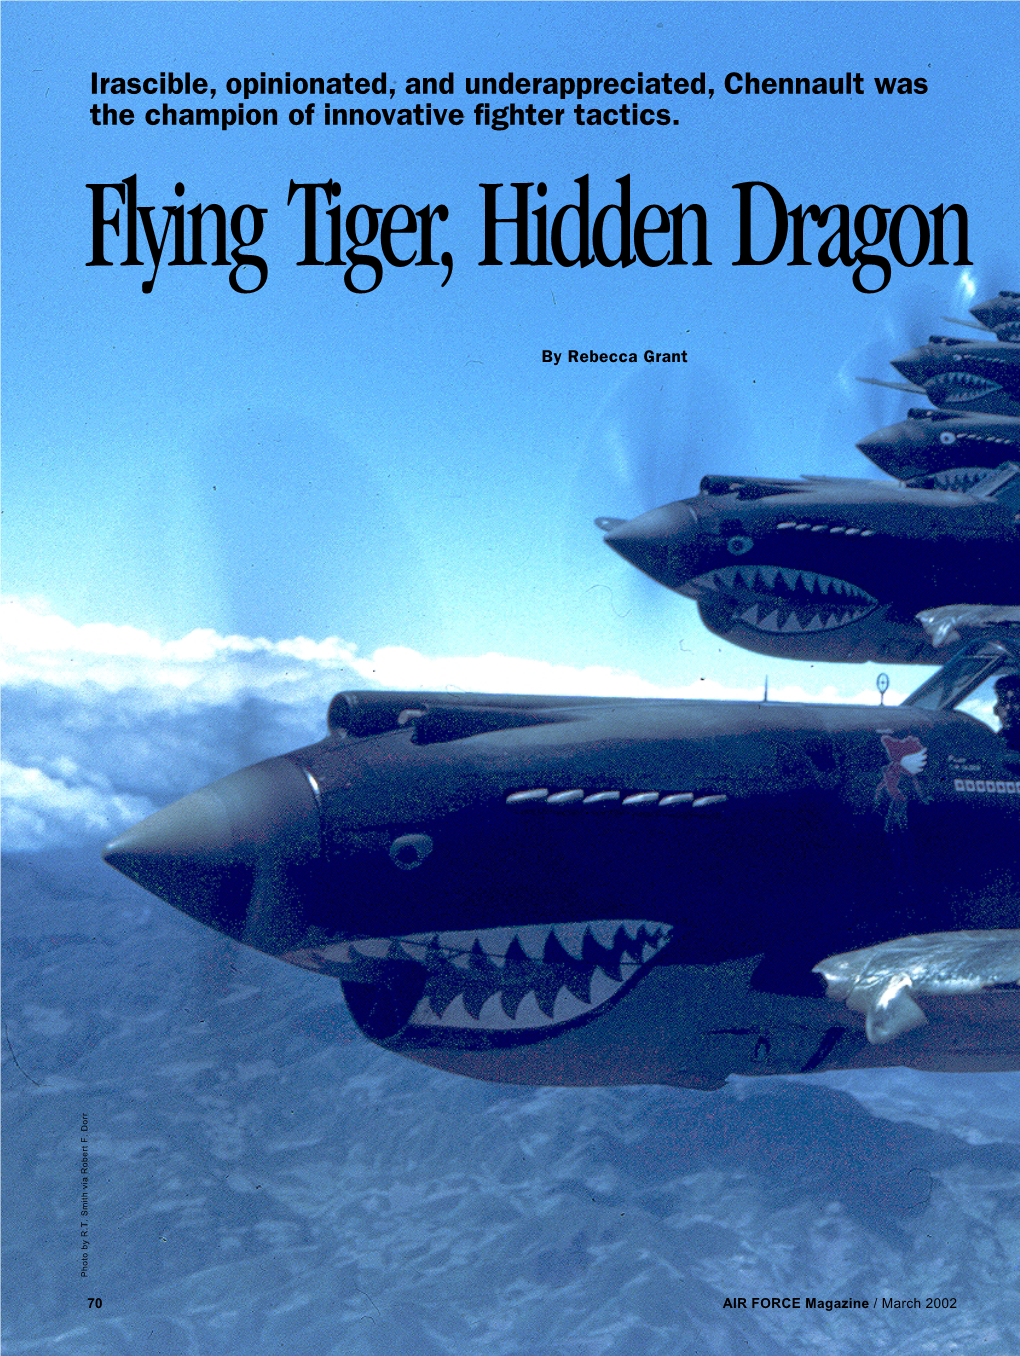 Flying Tiger, Hidden Dragon GII “Flying Tigers.” Chennault’S Heroics Against Japanese Forces in the Far